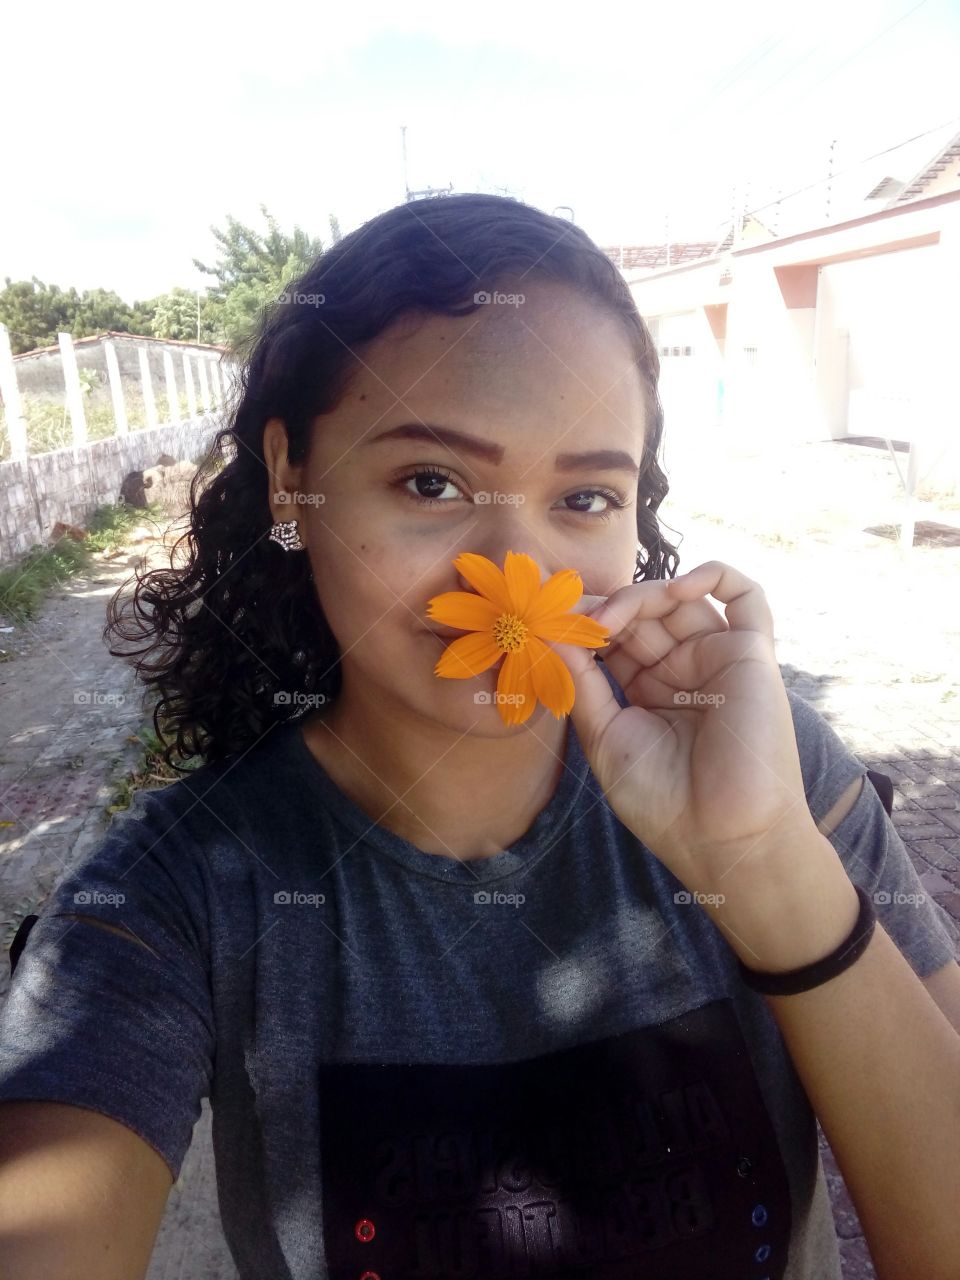 This morning when I went shopping for bread, I found this little flower on the floor and was just taking a picture of it, but decided to take a selfie with it